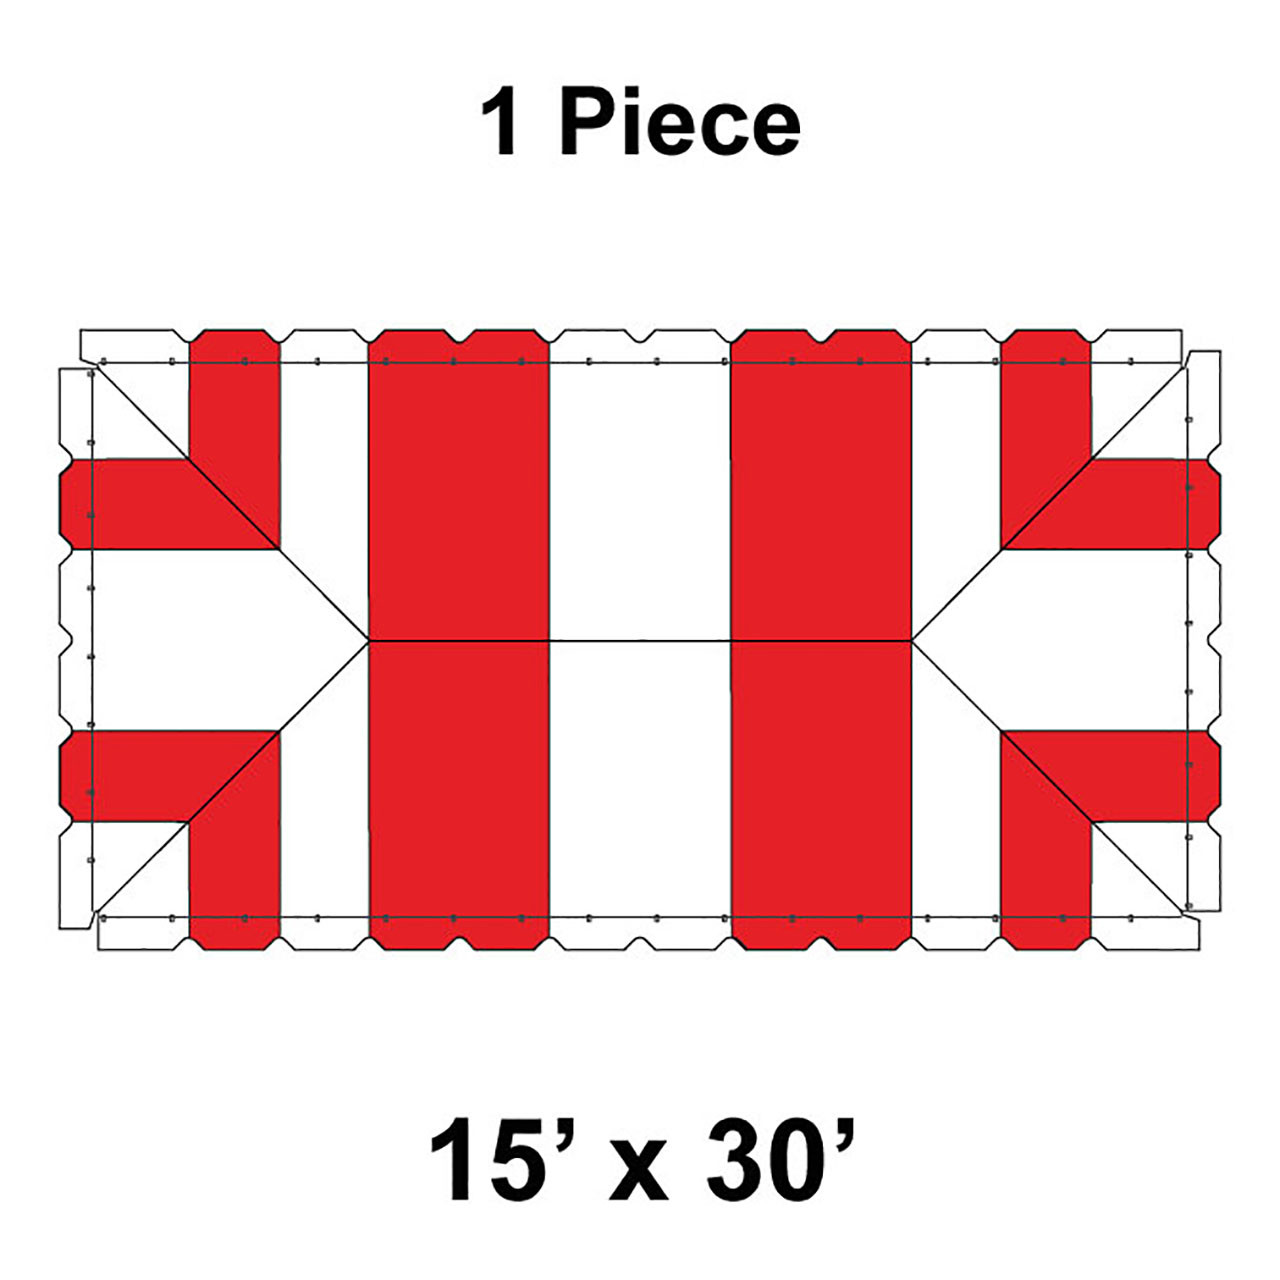 15' x 30' Classic Frame Tent, 1 Piece, 16 oz. Ratchet Top,  White and Red